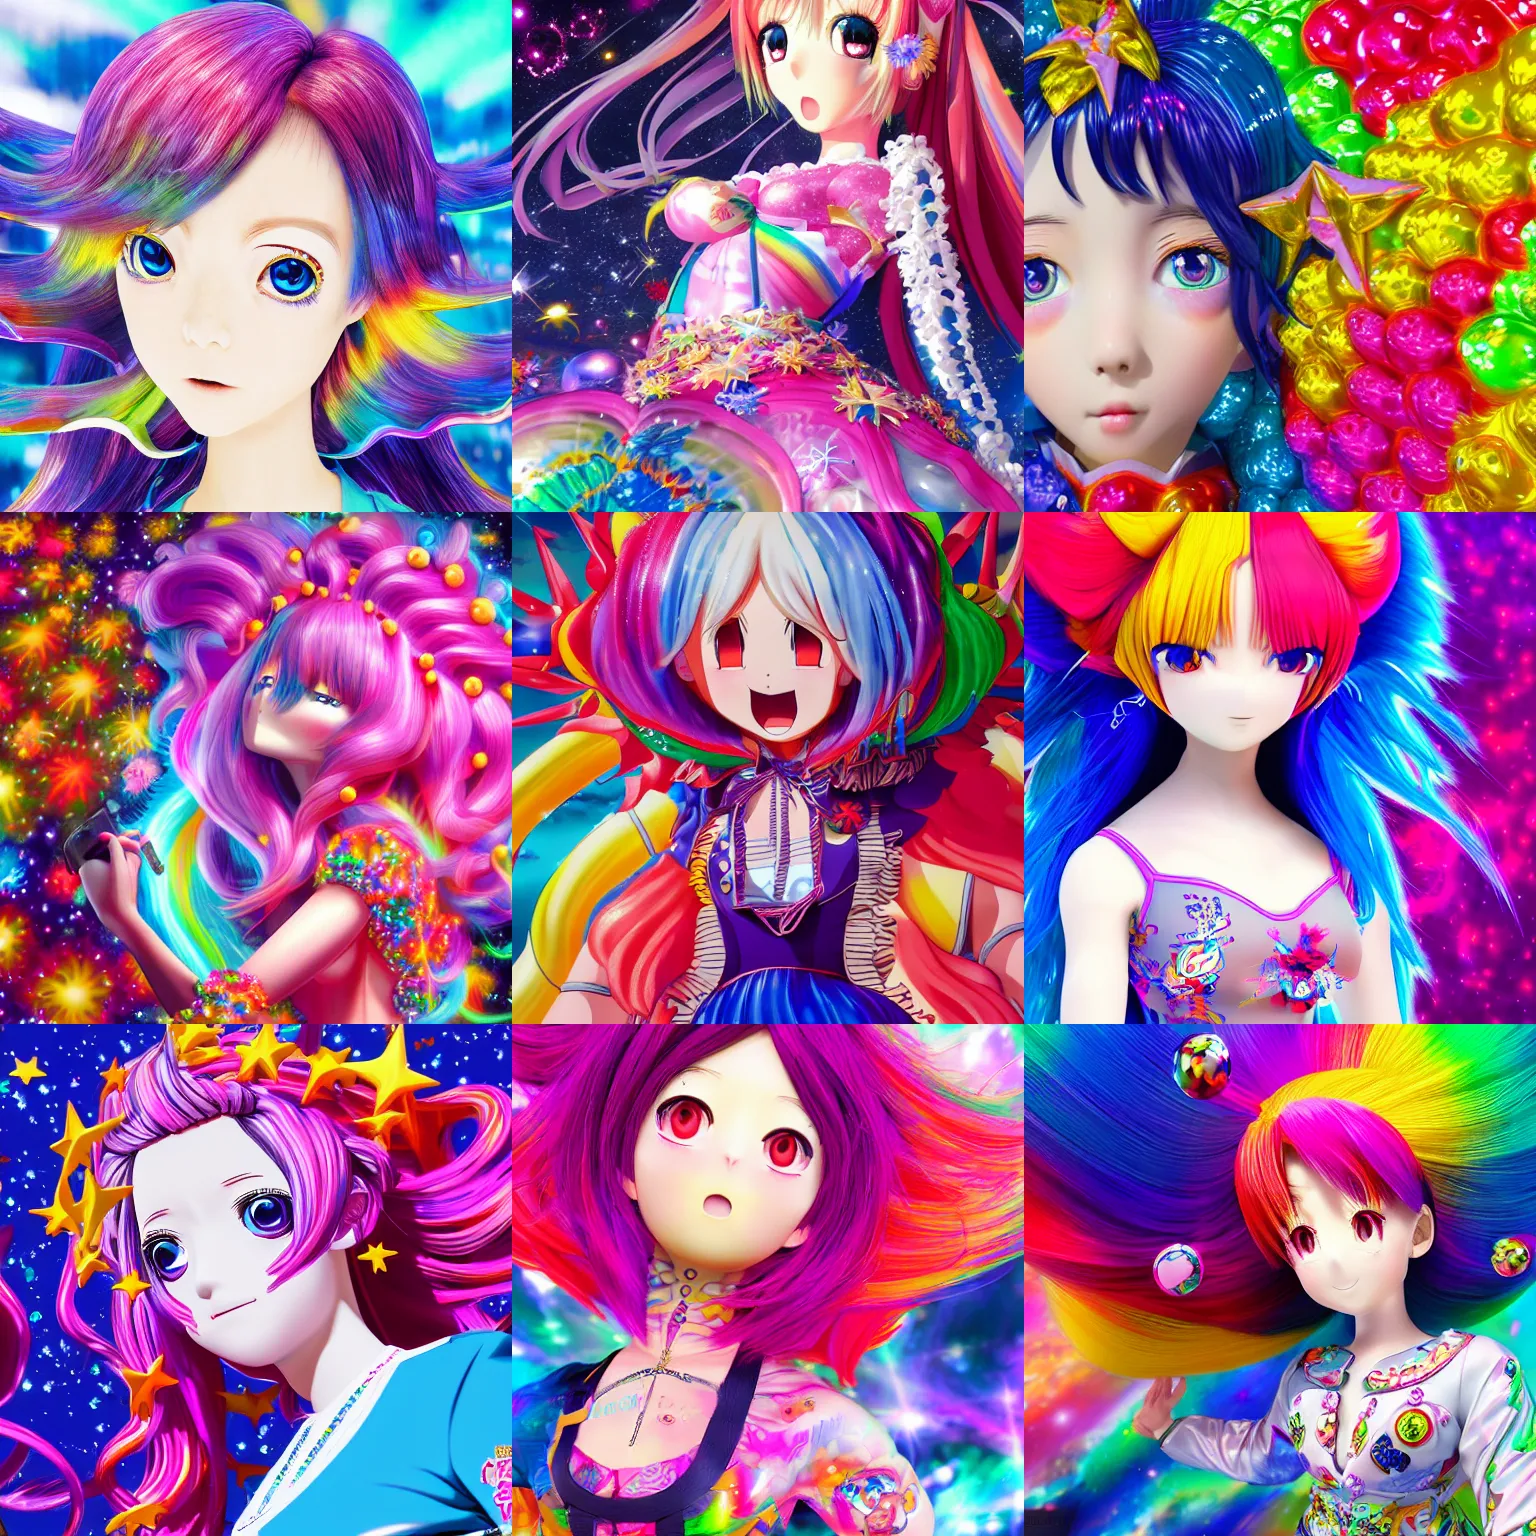 Prompt: Anime girl with cosmic hair, high of the face, Technicolor, Megapixel, Ray Tracing Global Illumination, Starburst, insanely detailed and intricate, hypermaximalist, elegant, ornate, hyper realistic, super detailed, by Jeff Koons